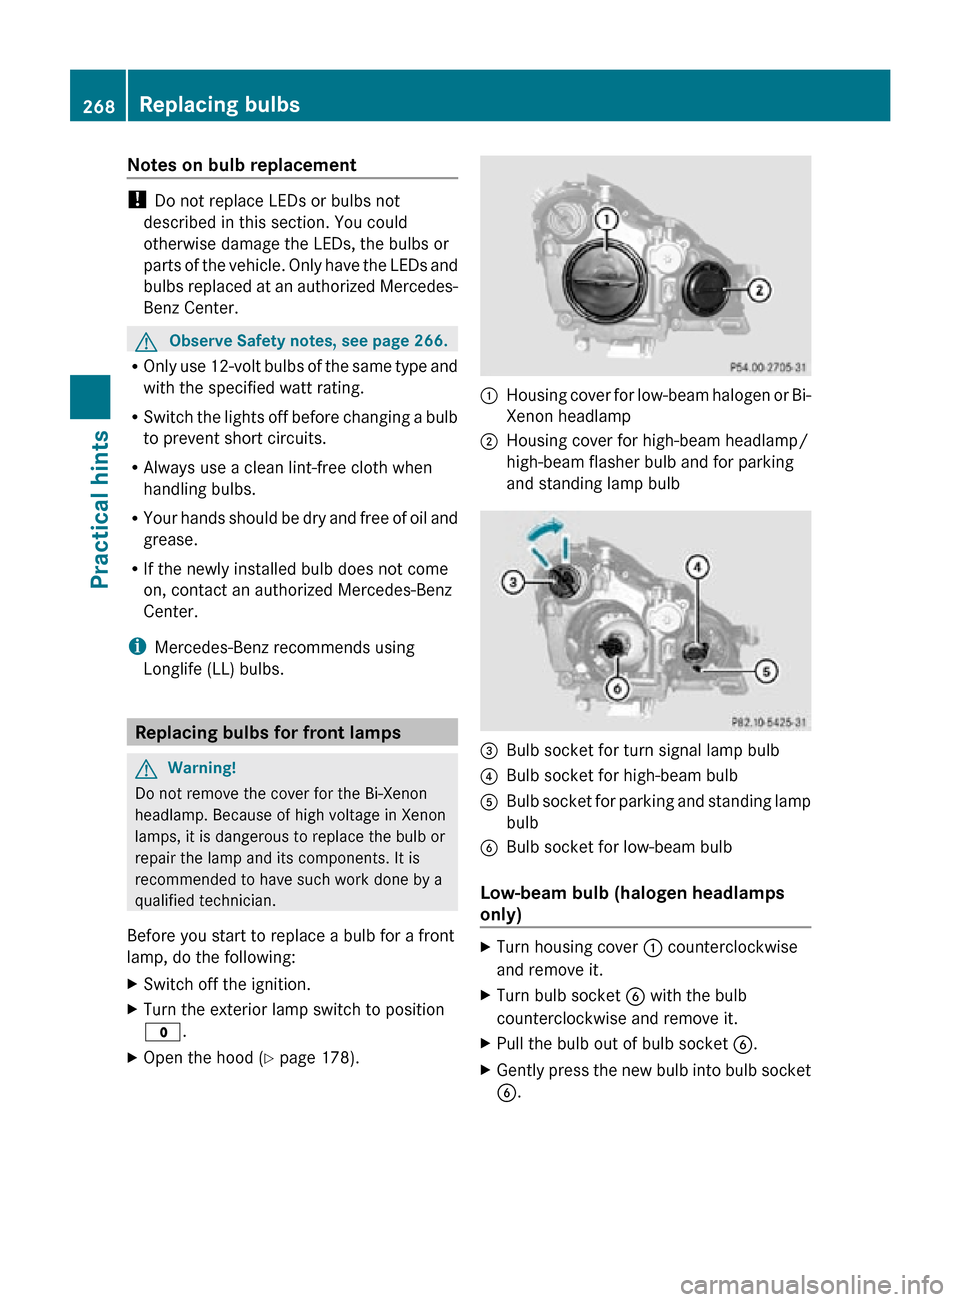 MERCEDES-BENZ CLS550 2010 W219 Owners Manual Notes on bulb replacement
! 
Do not replace LEDs or bulbs not
described in this section. You could
otherwise damage the LEDs, the bulbs or
parts of the vehicle. Only have the LEDs and
bulbs replaced a